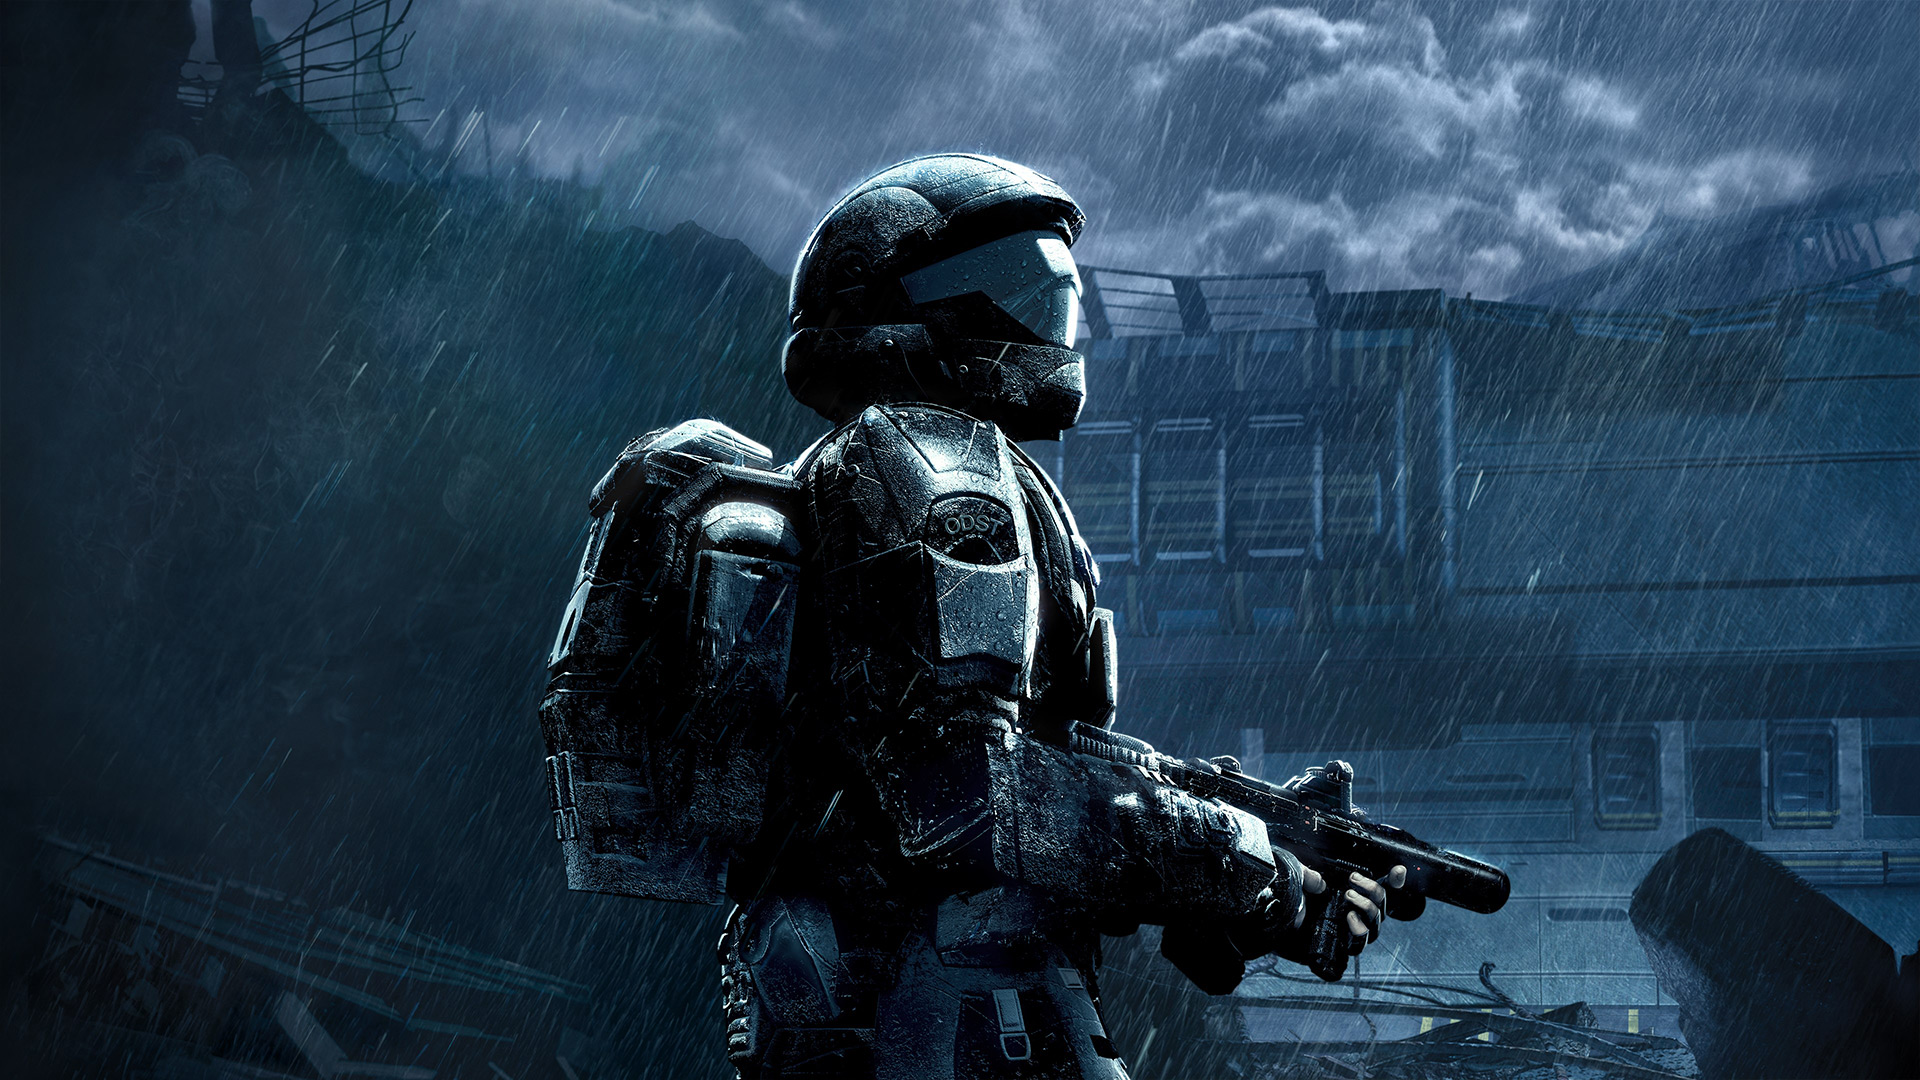 Halo games in order: Halo 3: ODST art showing an ODST soldier standing in the rain with a weapon at their hip.